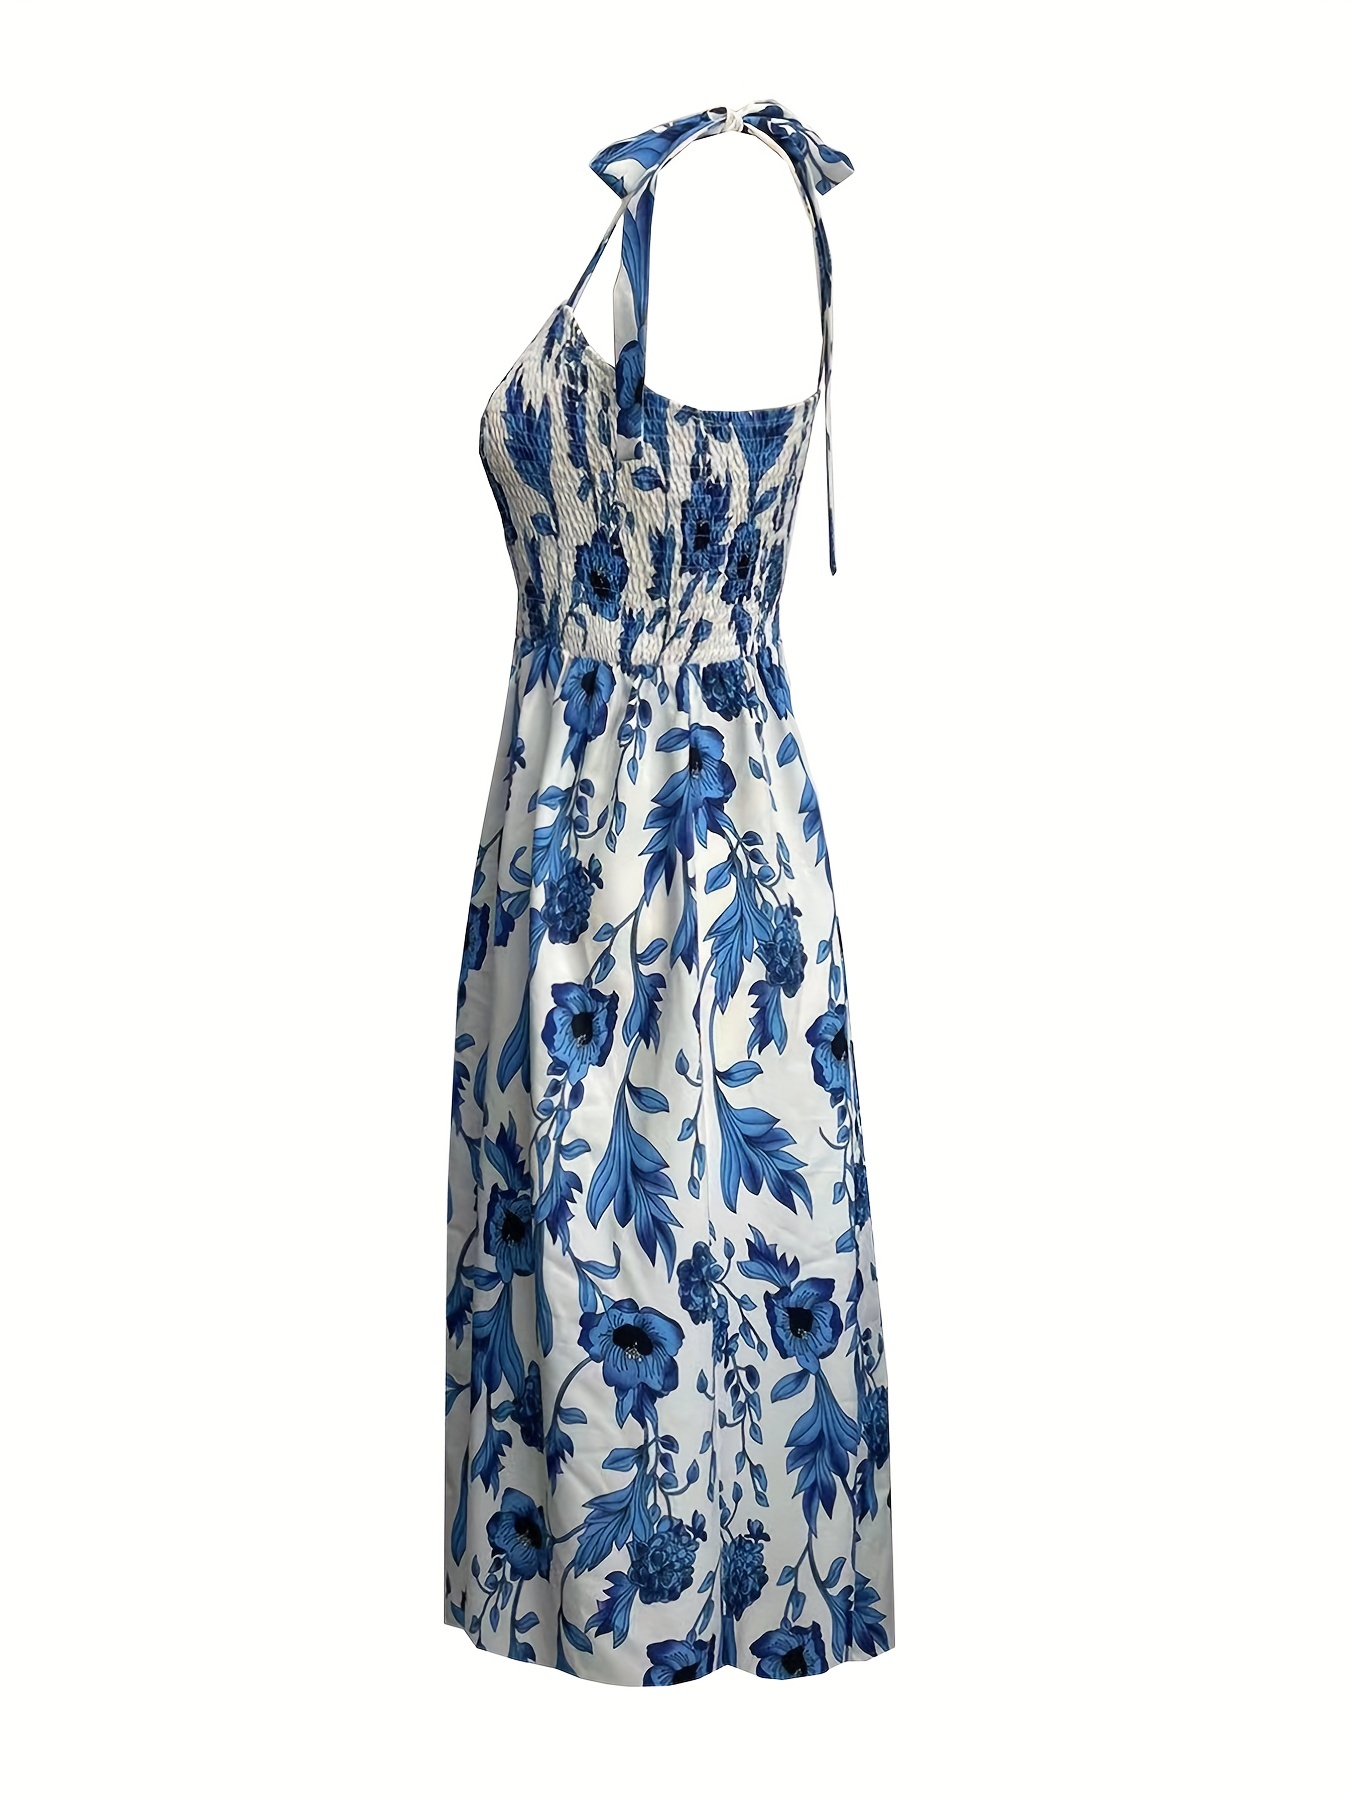 floral print strap shirred dress vacation wear sleeveless dress for summer womens clothing